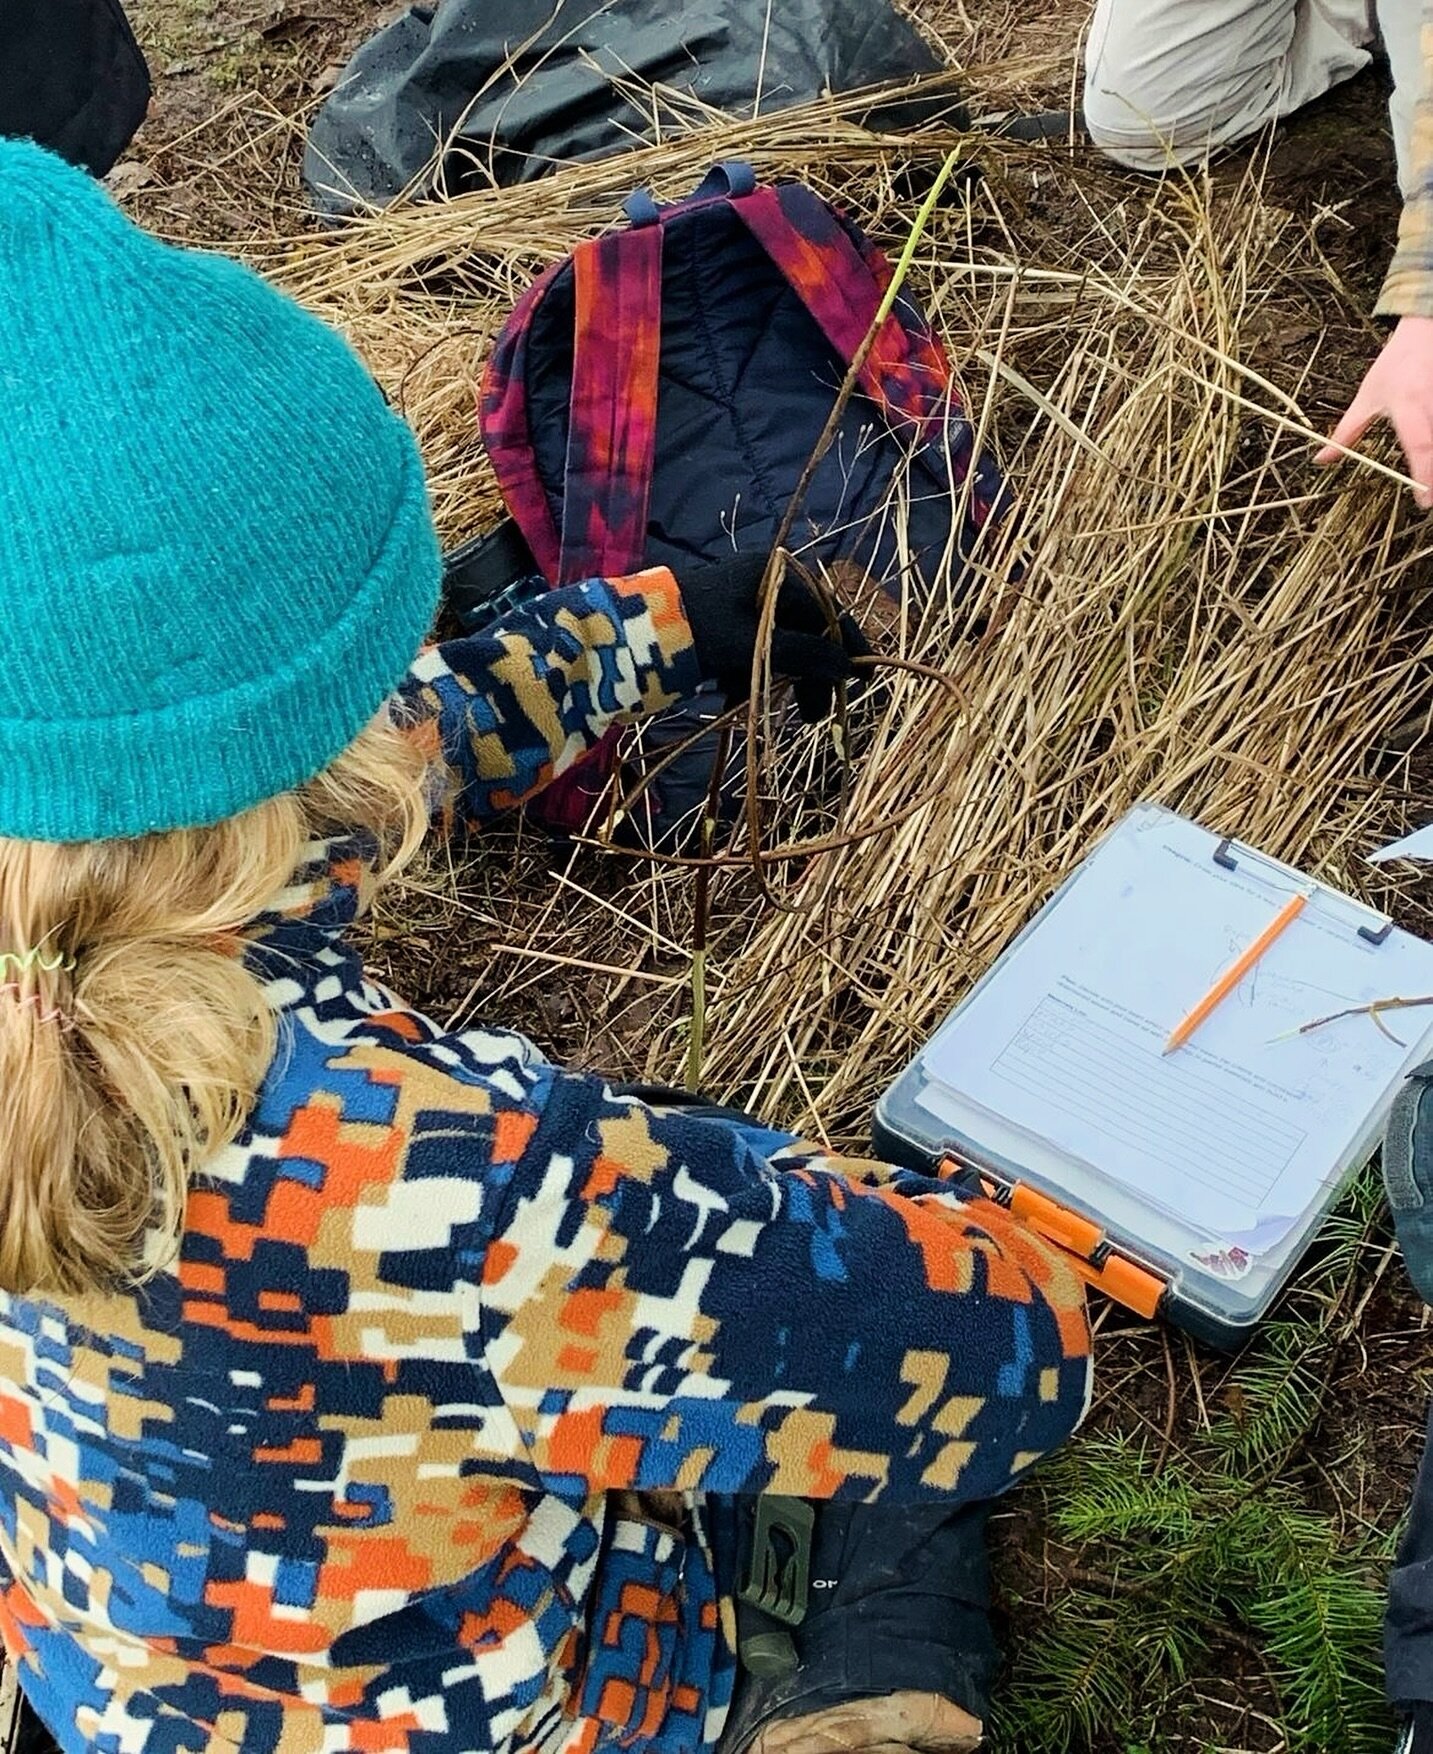 2023- 7th grade preps materials and plans for their engineering challenge of a ceramic cup drop.
🌿
#forestschool #engineering #stem #handsonlearning #learningthroughnature #middleschool #howwelearn #outdoorschool #pdxforestschool #portlandoregon